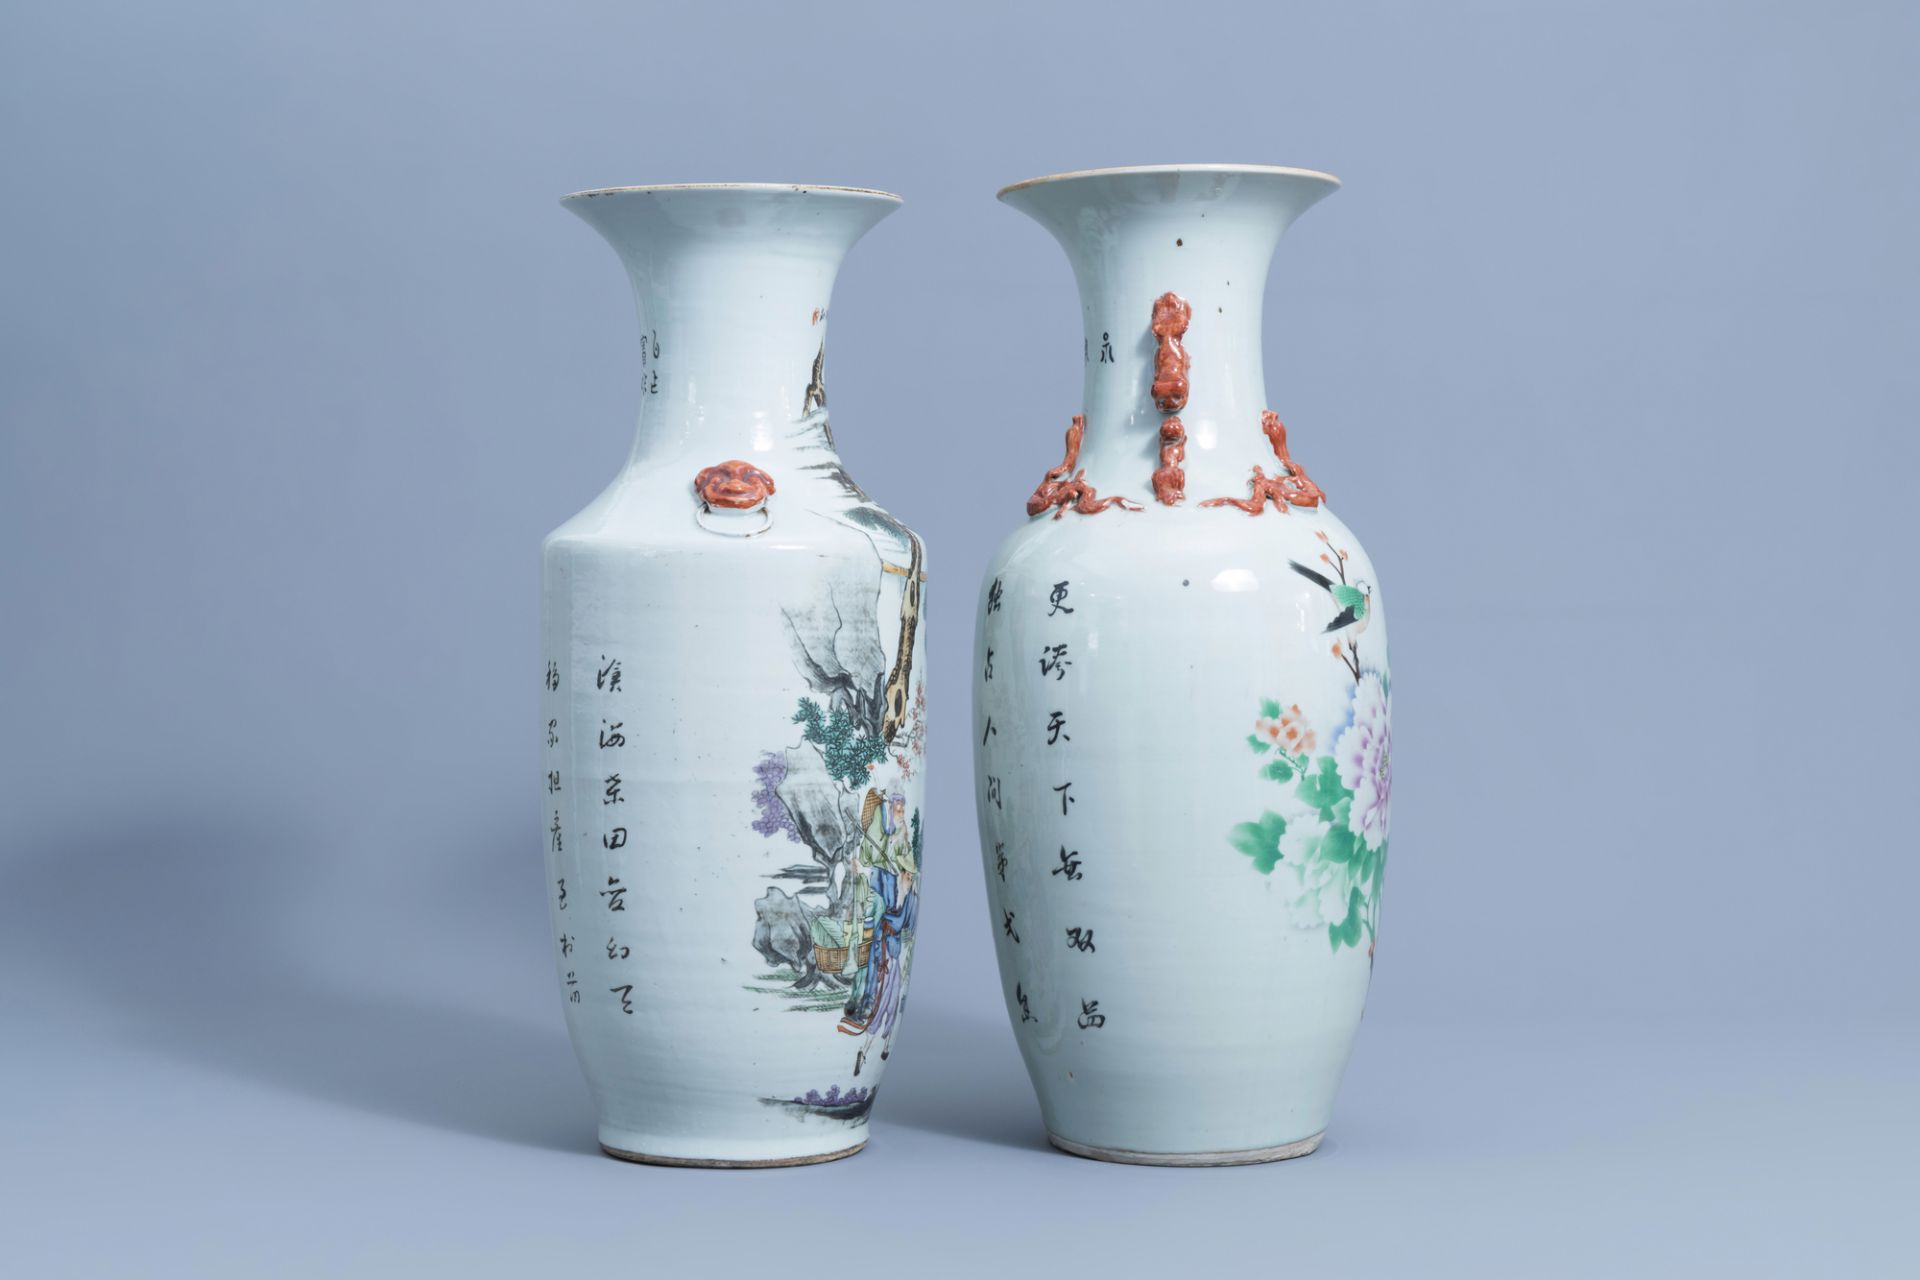 Two Chinese famille rose vases with figurative design & a bird among blossoms, 19th/20th C. - Image 2 of 6